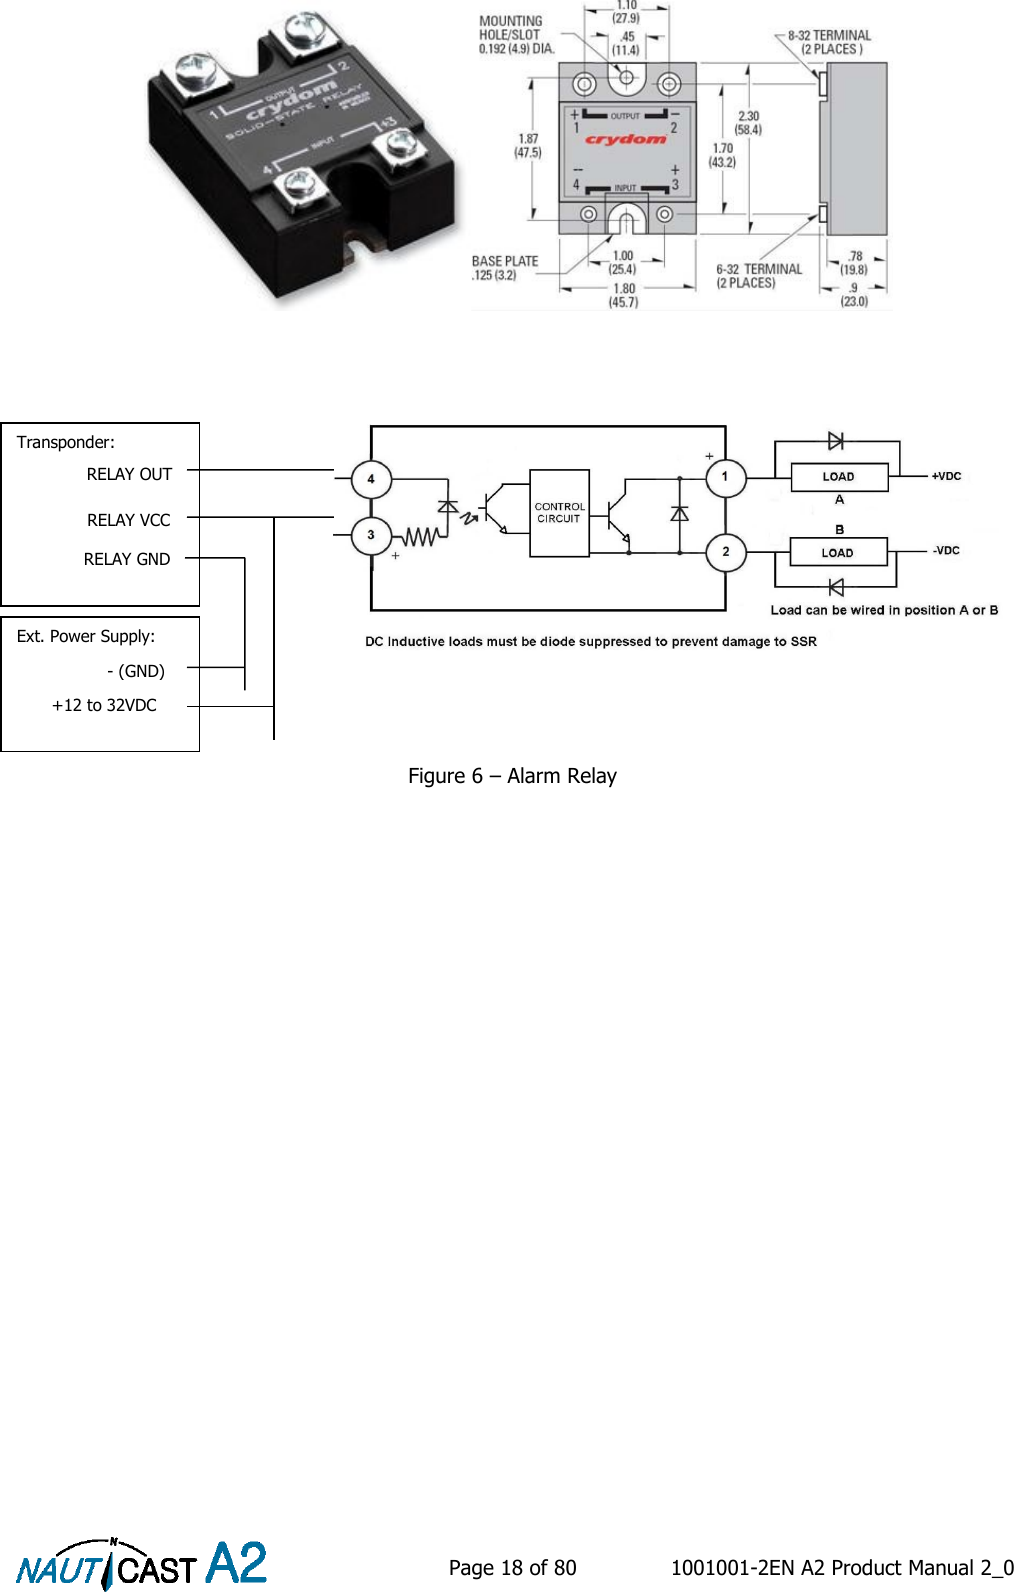    Page 18 of 80  1001001-2EN A2 Product Manual 2_0                      Figure 6 – Alarm Relay   Transponder: RELAY VCC RELAY GND RELAY OUT Ext. Power Supply: - (GND) +12 to 32VDC 